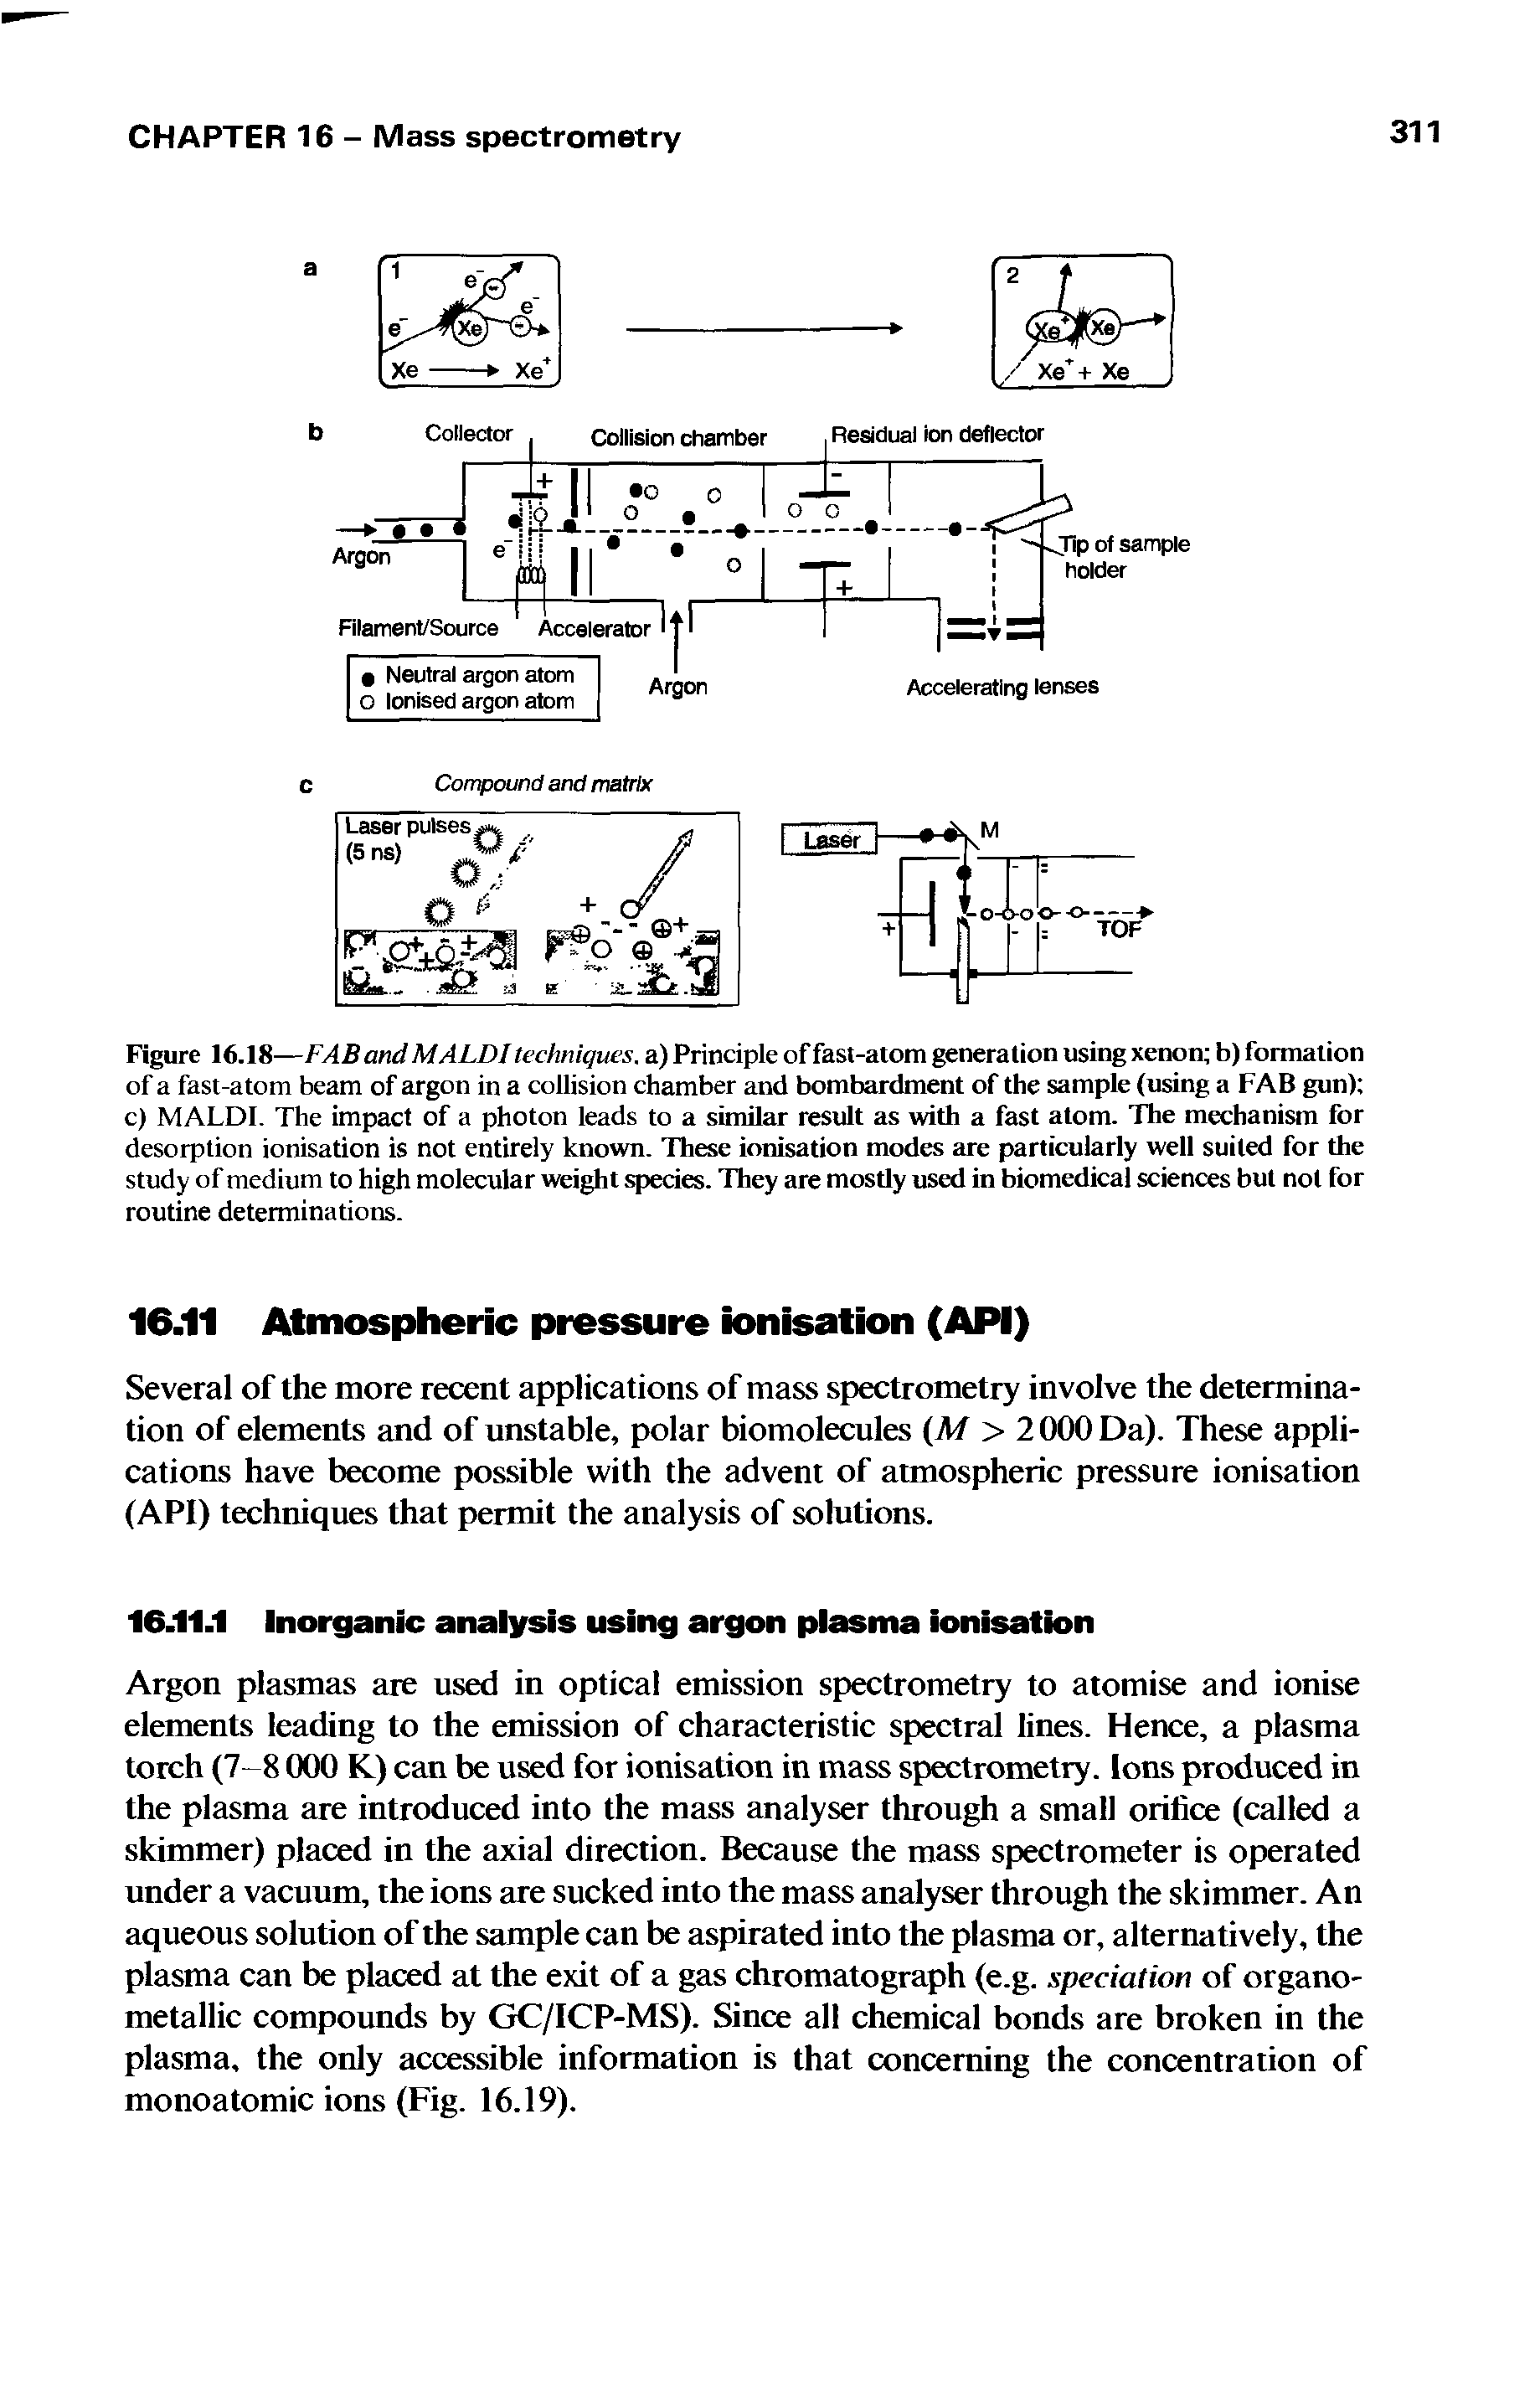 Figure 16.18—FAB and MALDI techniques, a) Principle of fast-atom generation using xenon b) formation of a fast-atom beam of argon in a collision chamber and bombardment of the sample (using a FAB gun) c) MALDI. The impact of a photon leads to a similar result as with a fast atom. The mechanism for desorption ionisation is not entirely known. These ionisation modes are particularly well suited for the study of medium to high molecular weight species. They are mostly used in biomedical sciences but not for routine determinations.